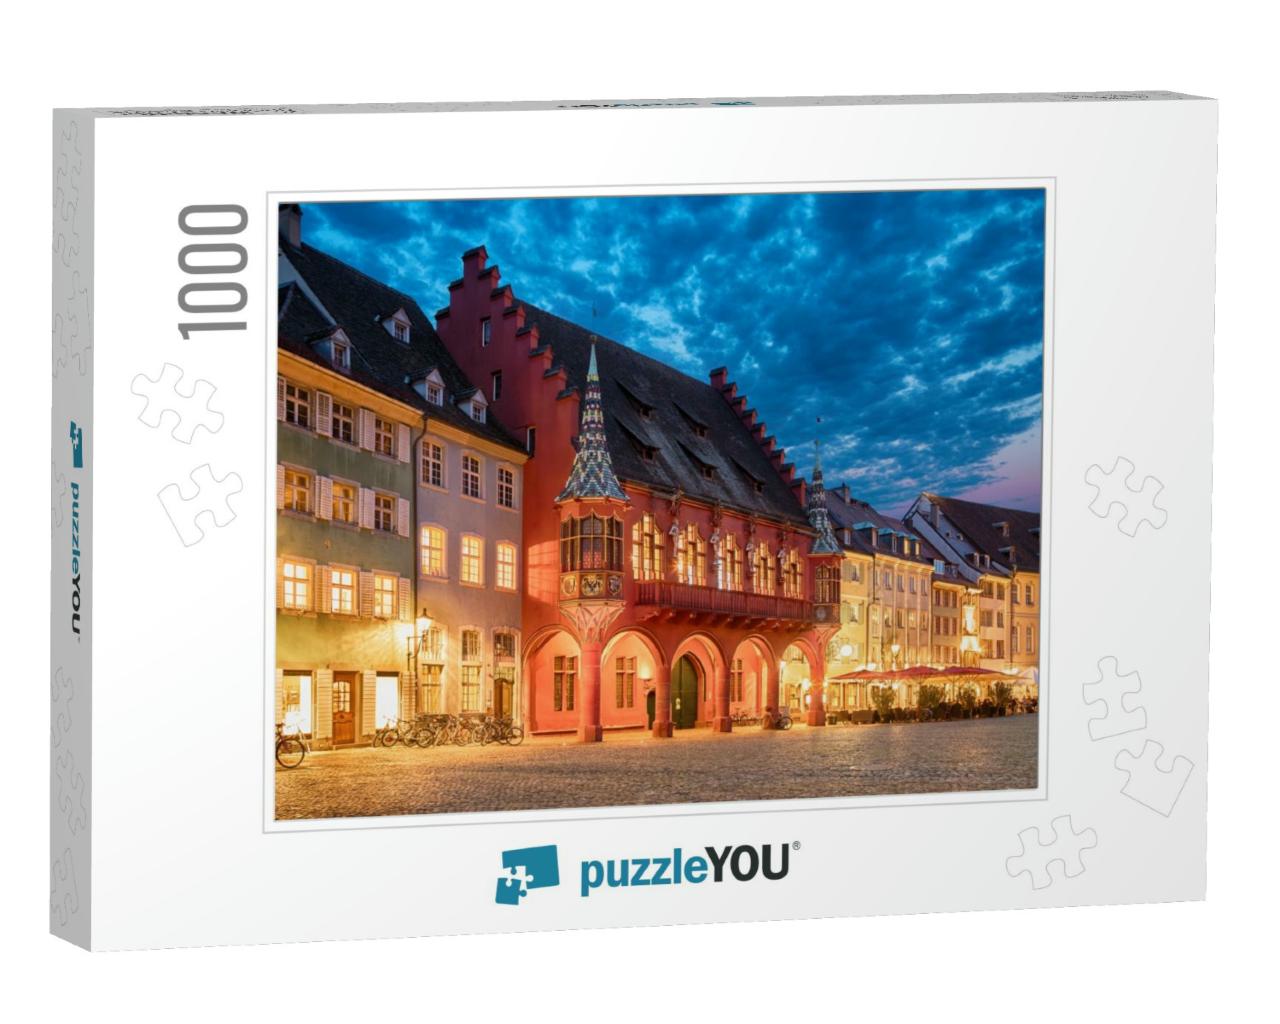 Historical Building of Merchants Hall Historisches Kaufha... Jigsaw Puzzle with 1000 pieces